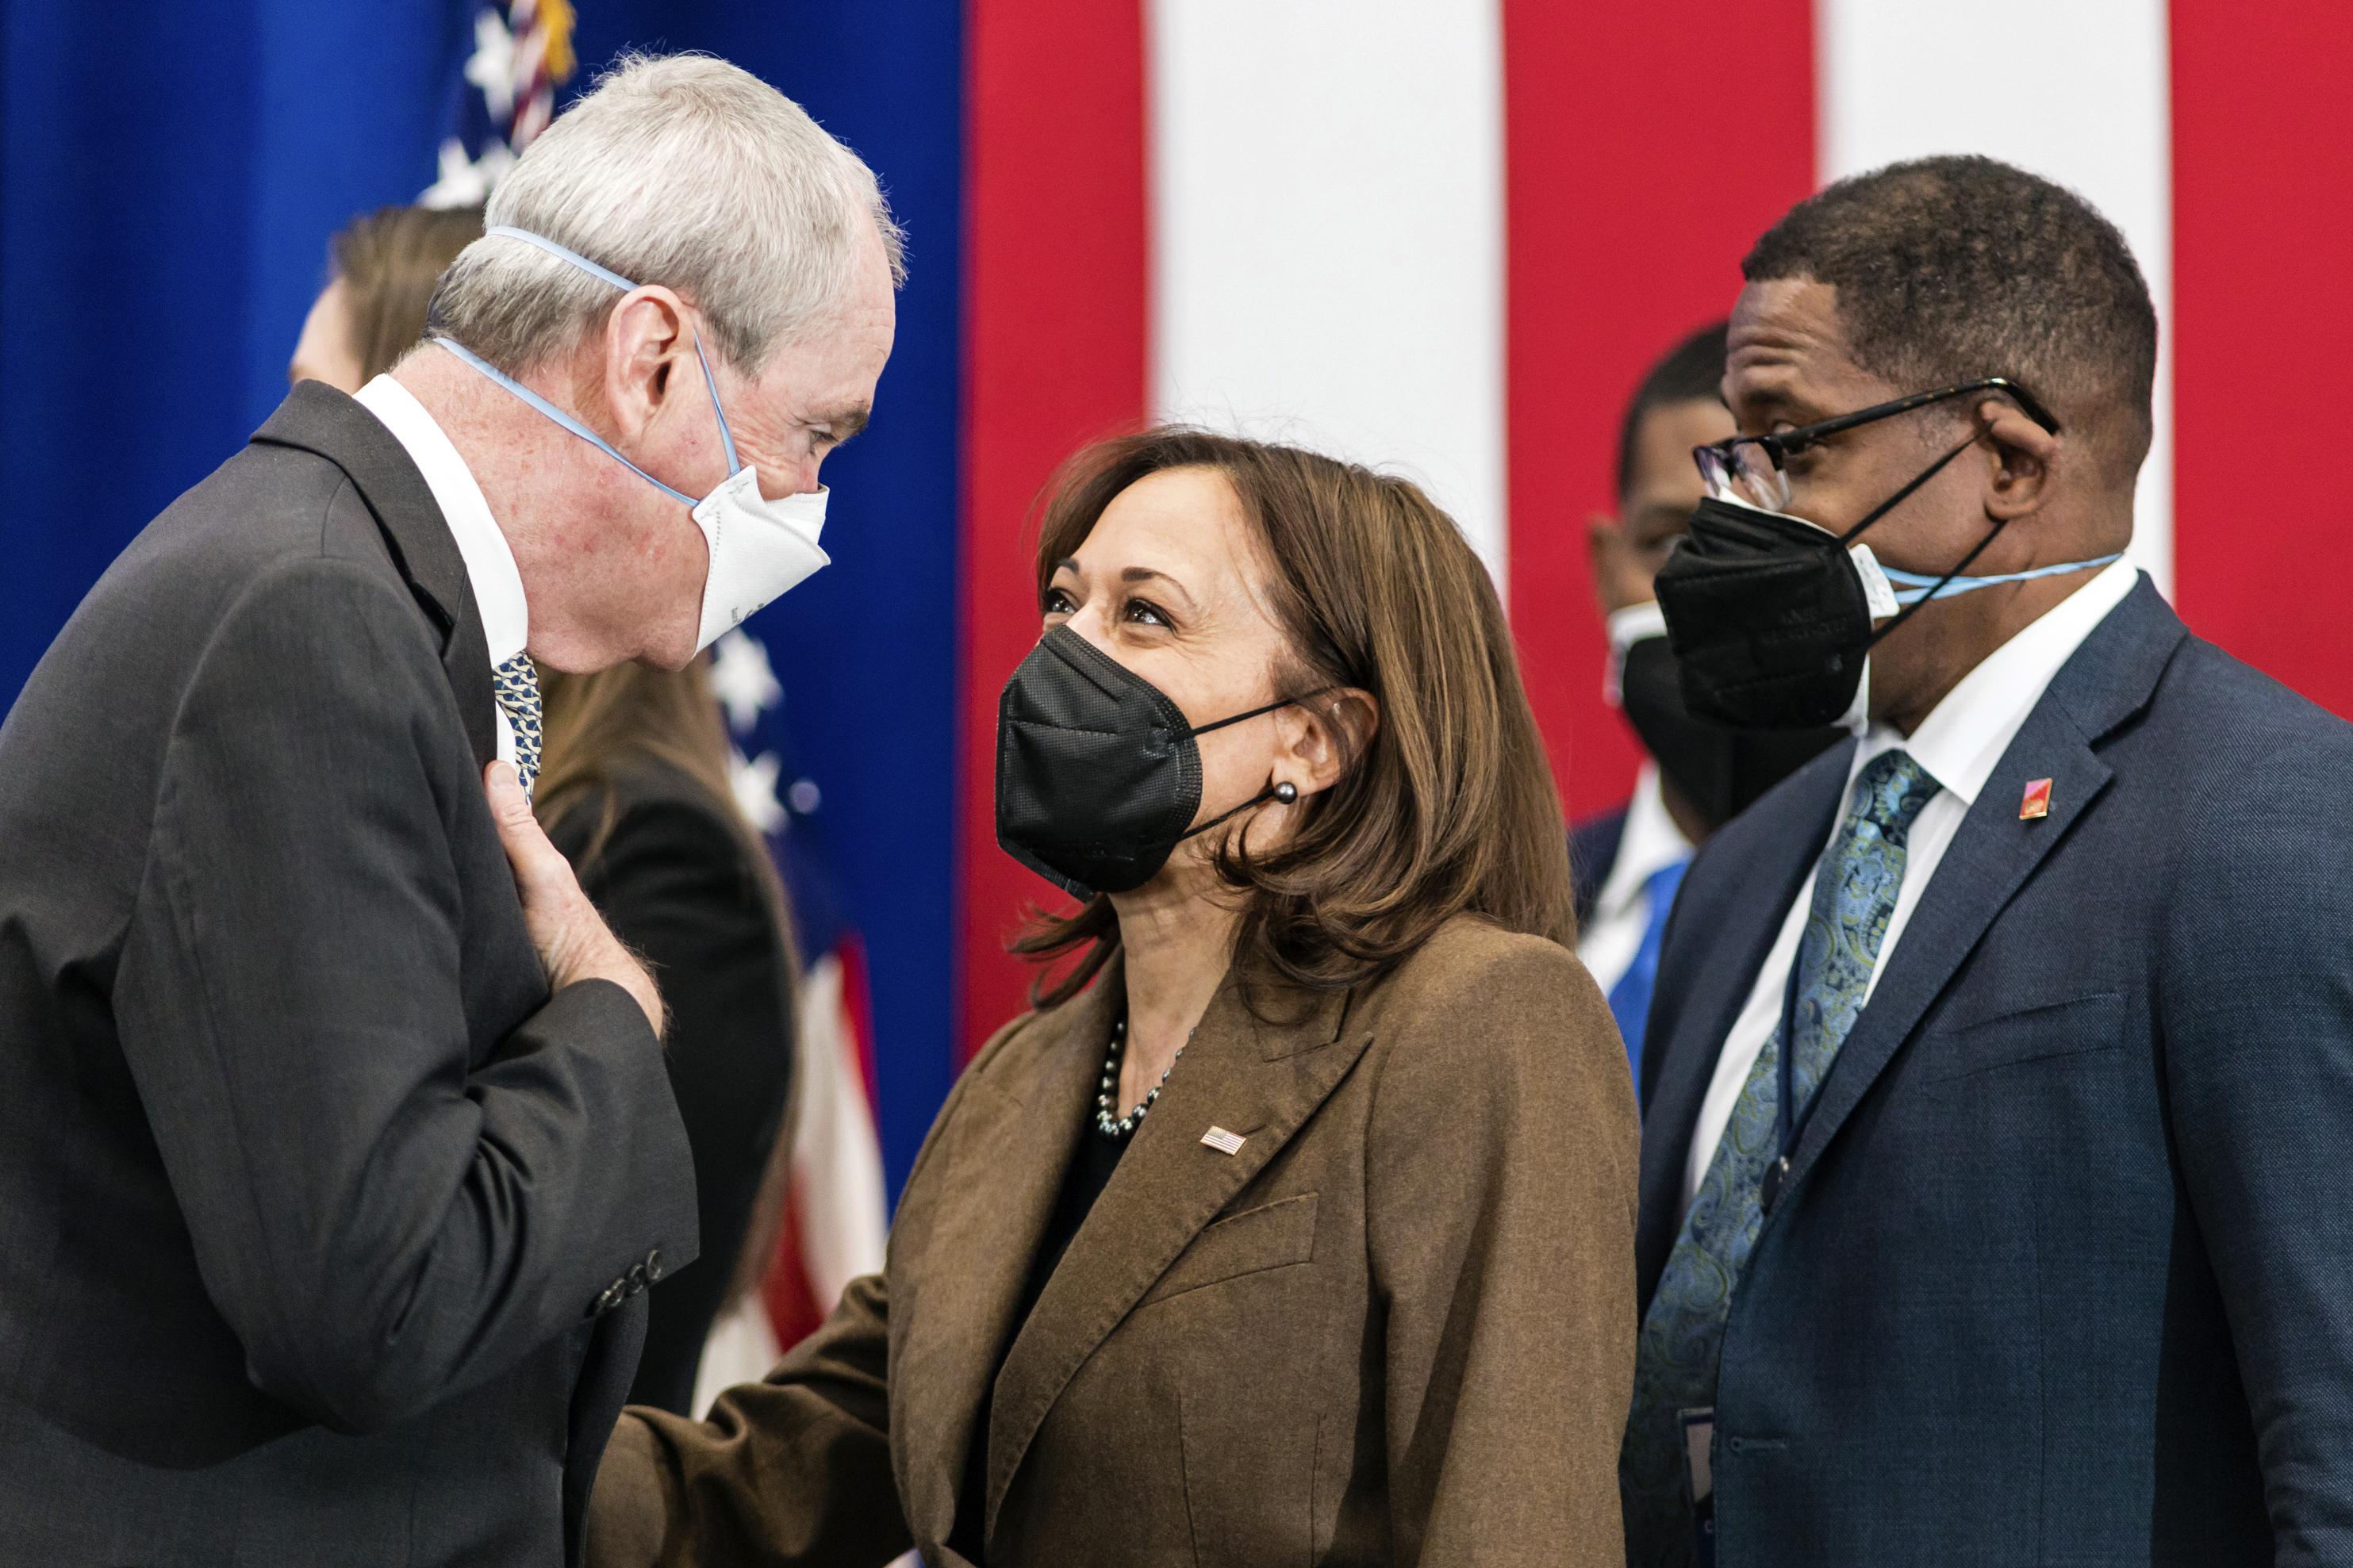 Harris in NJ points to Newark as model for lead replacement